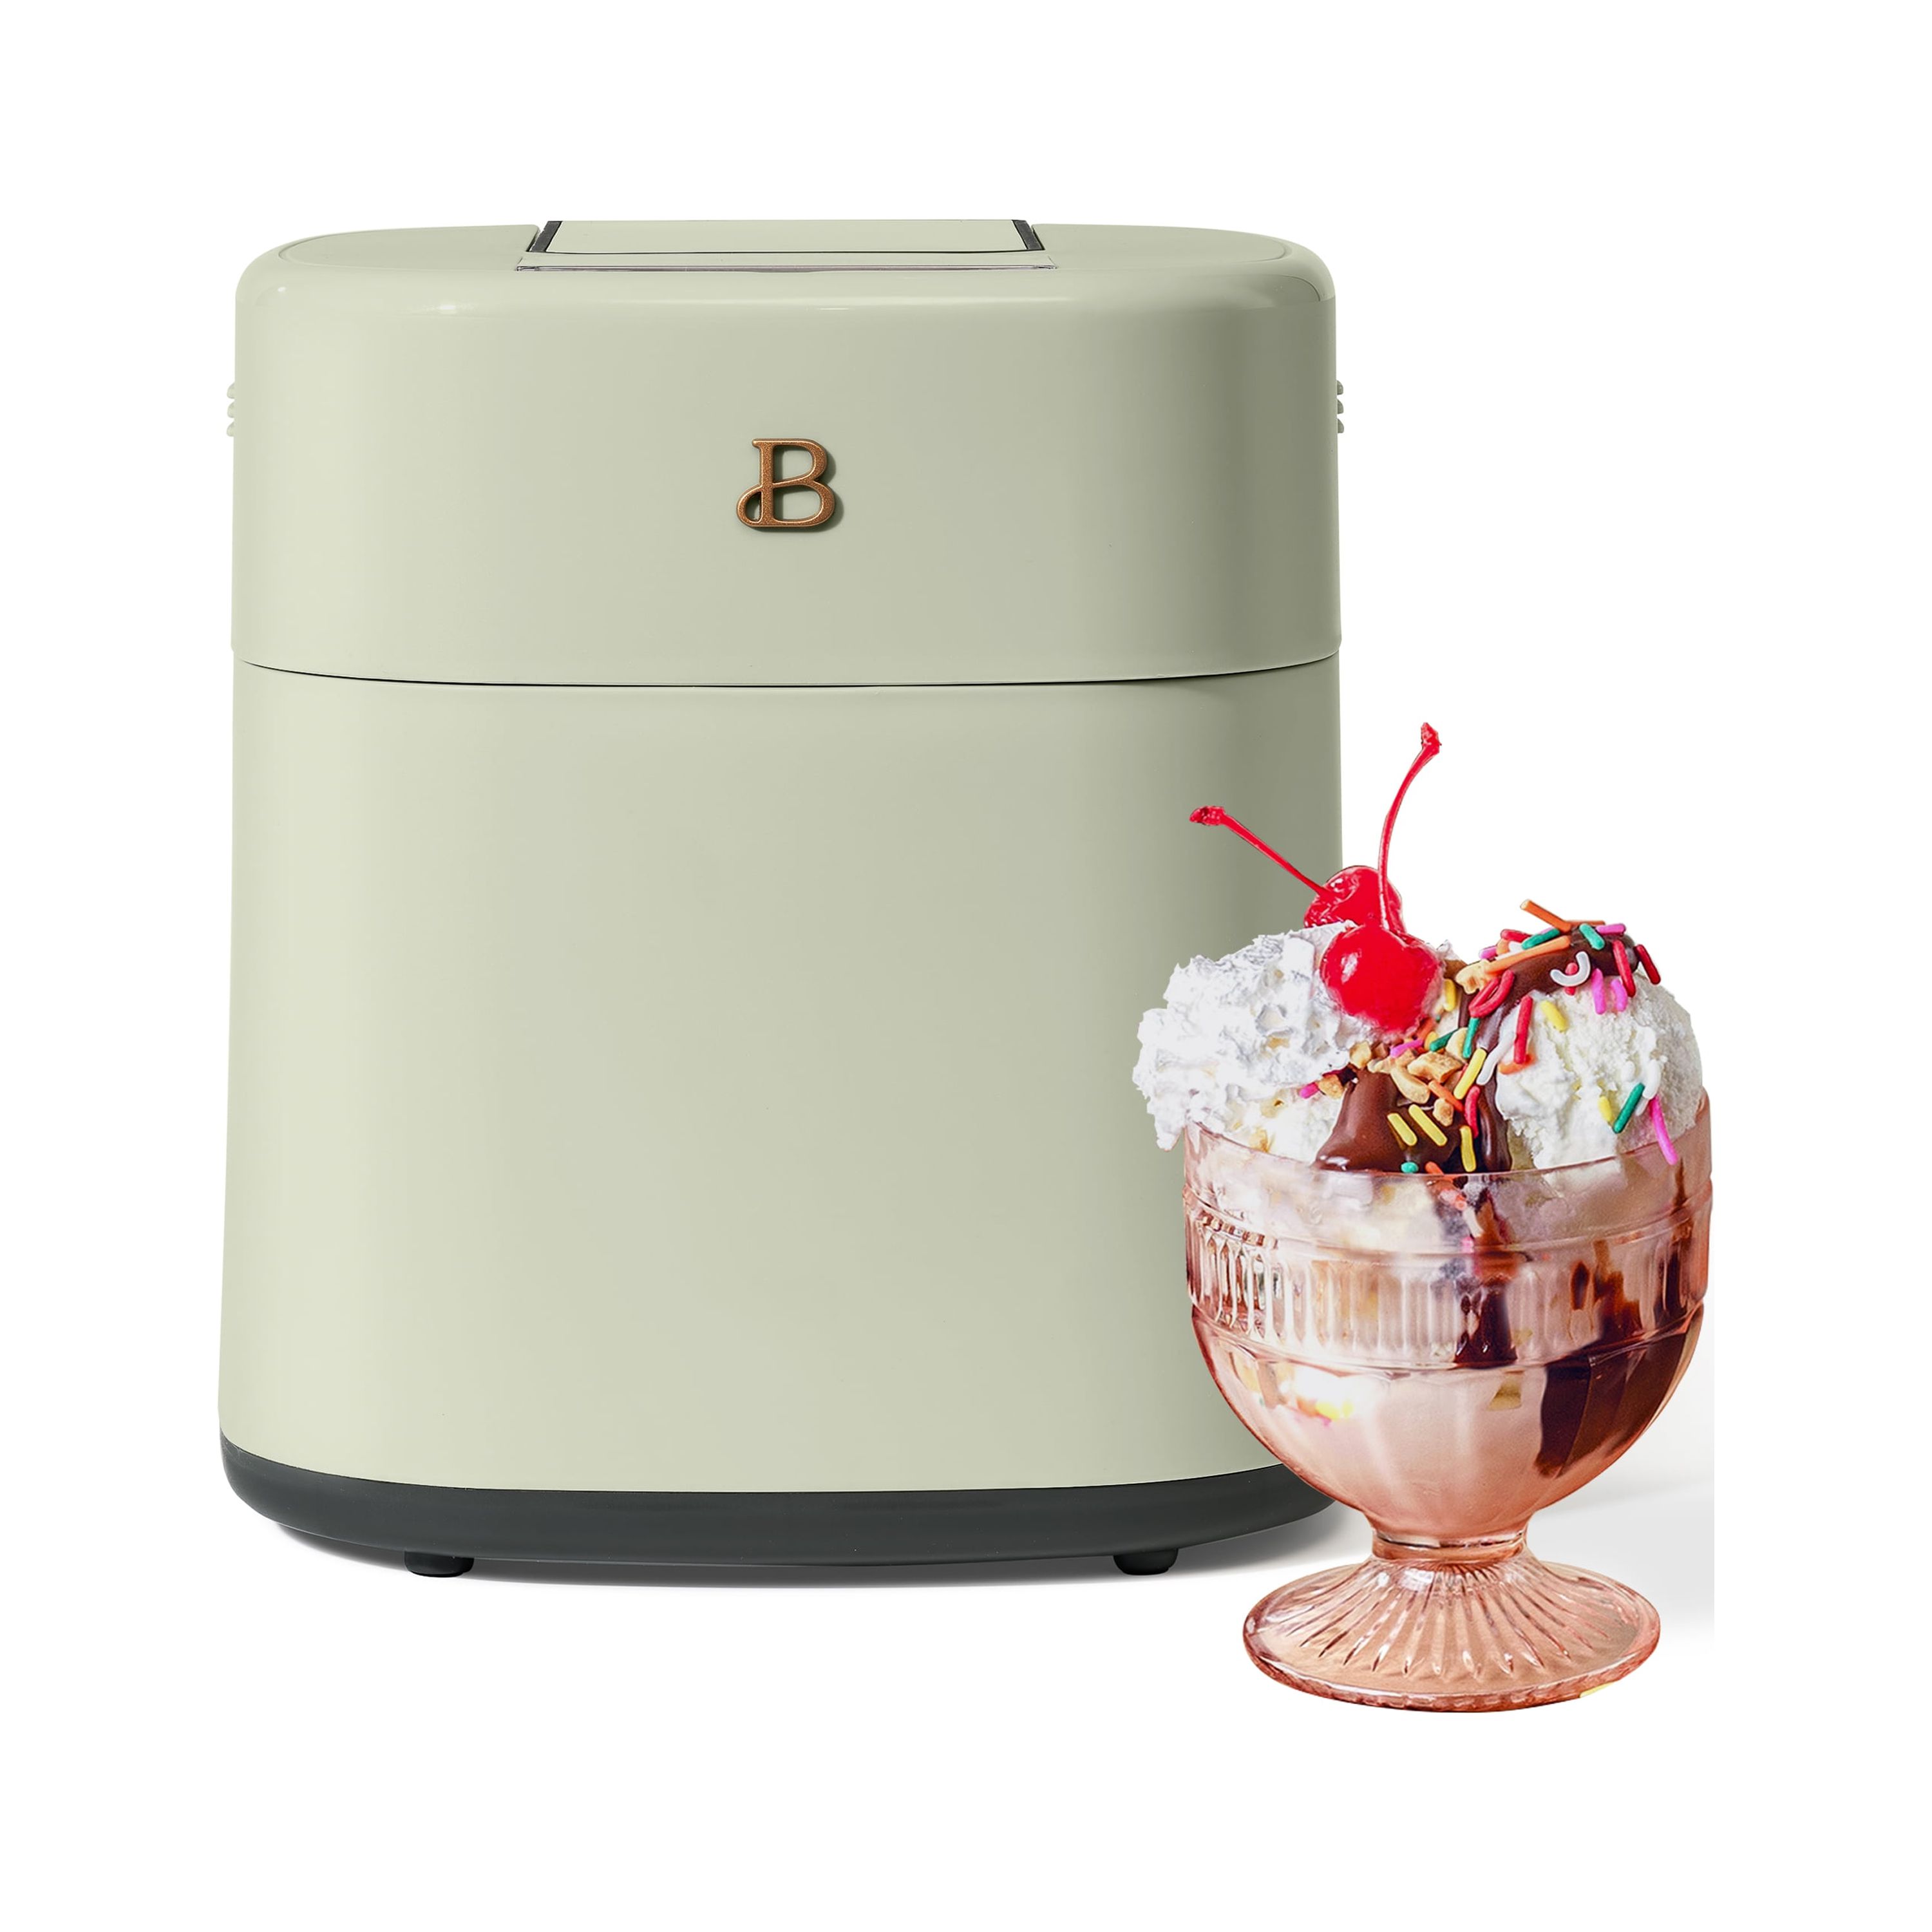 Beautiful 1.5 Qt Ice Cream Maker with Touch Activated Display, Sage Green by Drew Barrymore - image 1 of 13